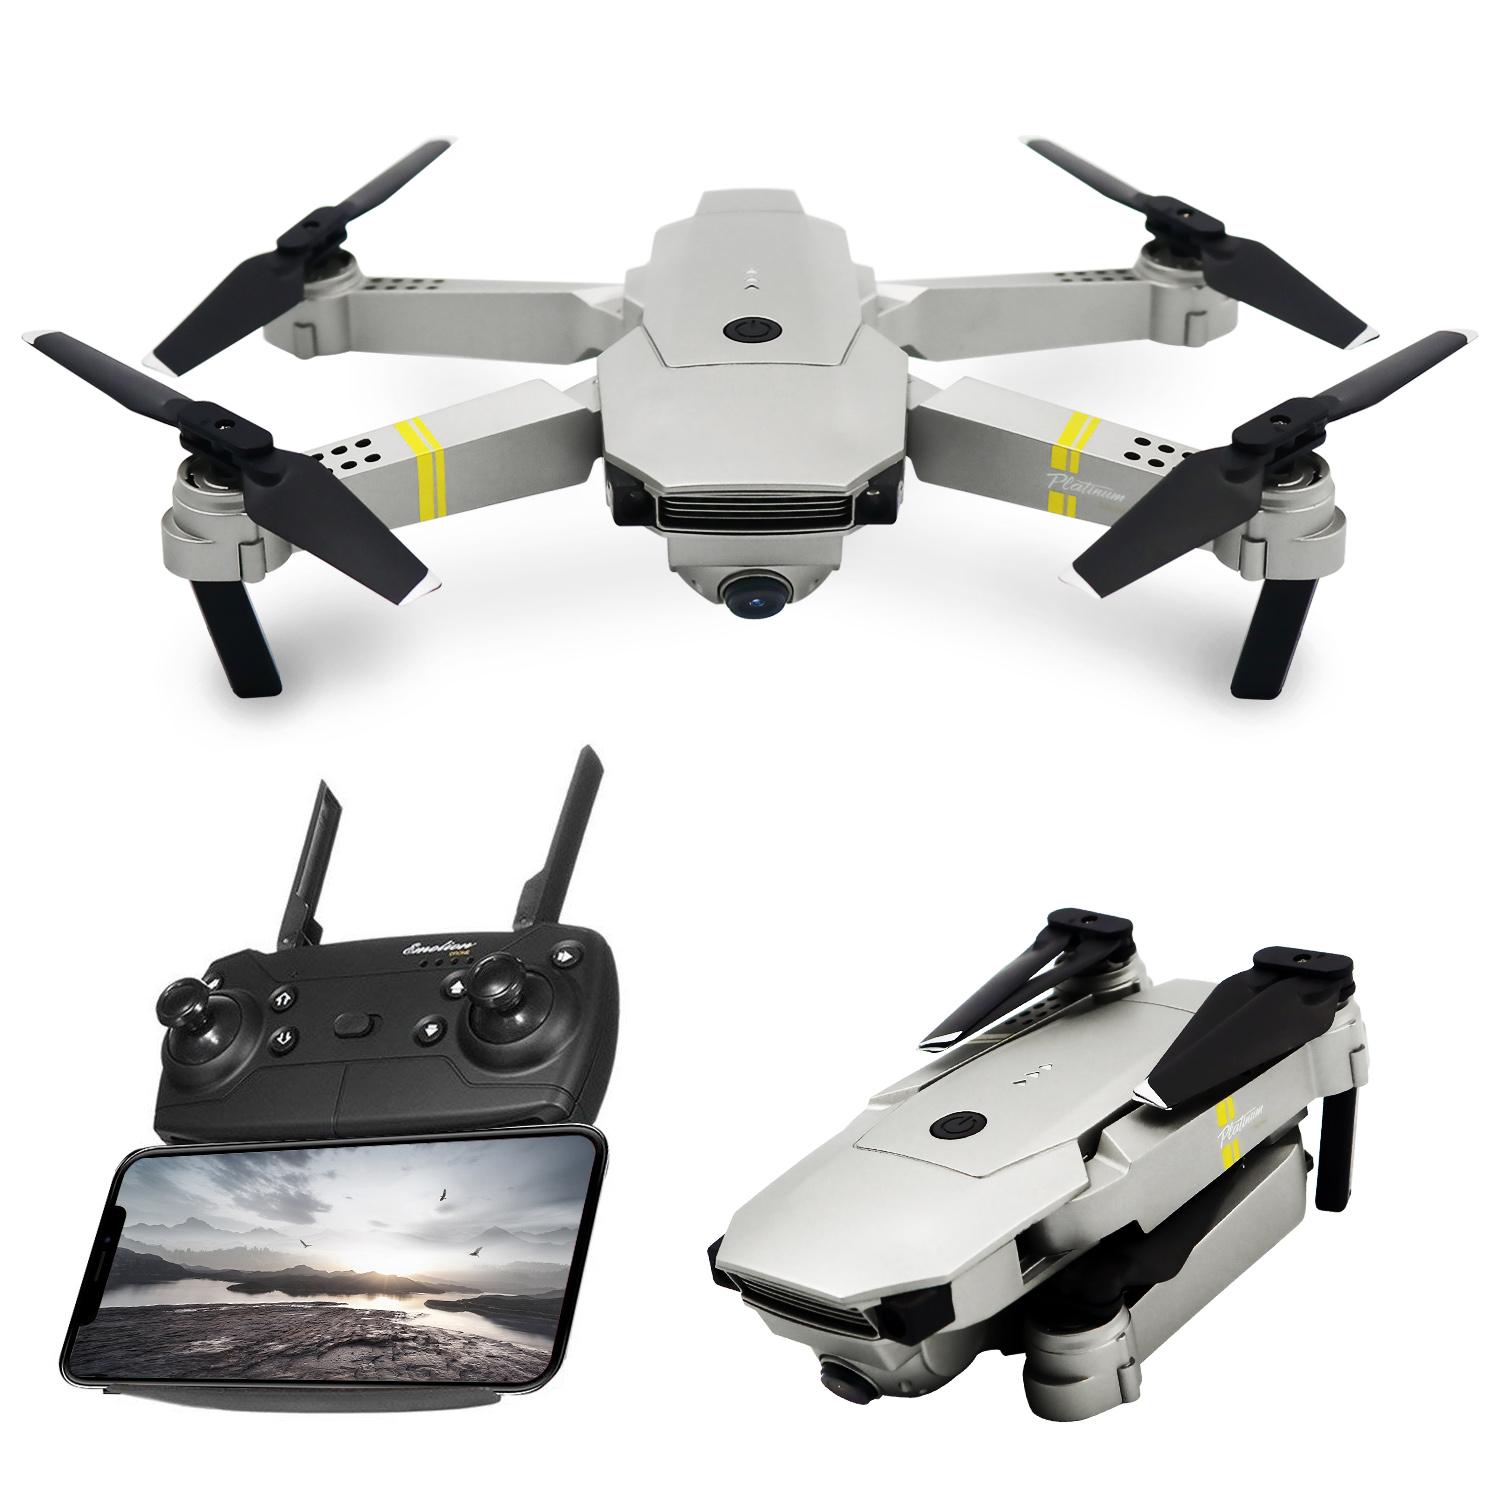 collapsible quadcopter drone x pro